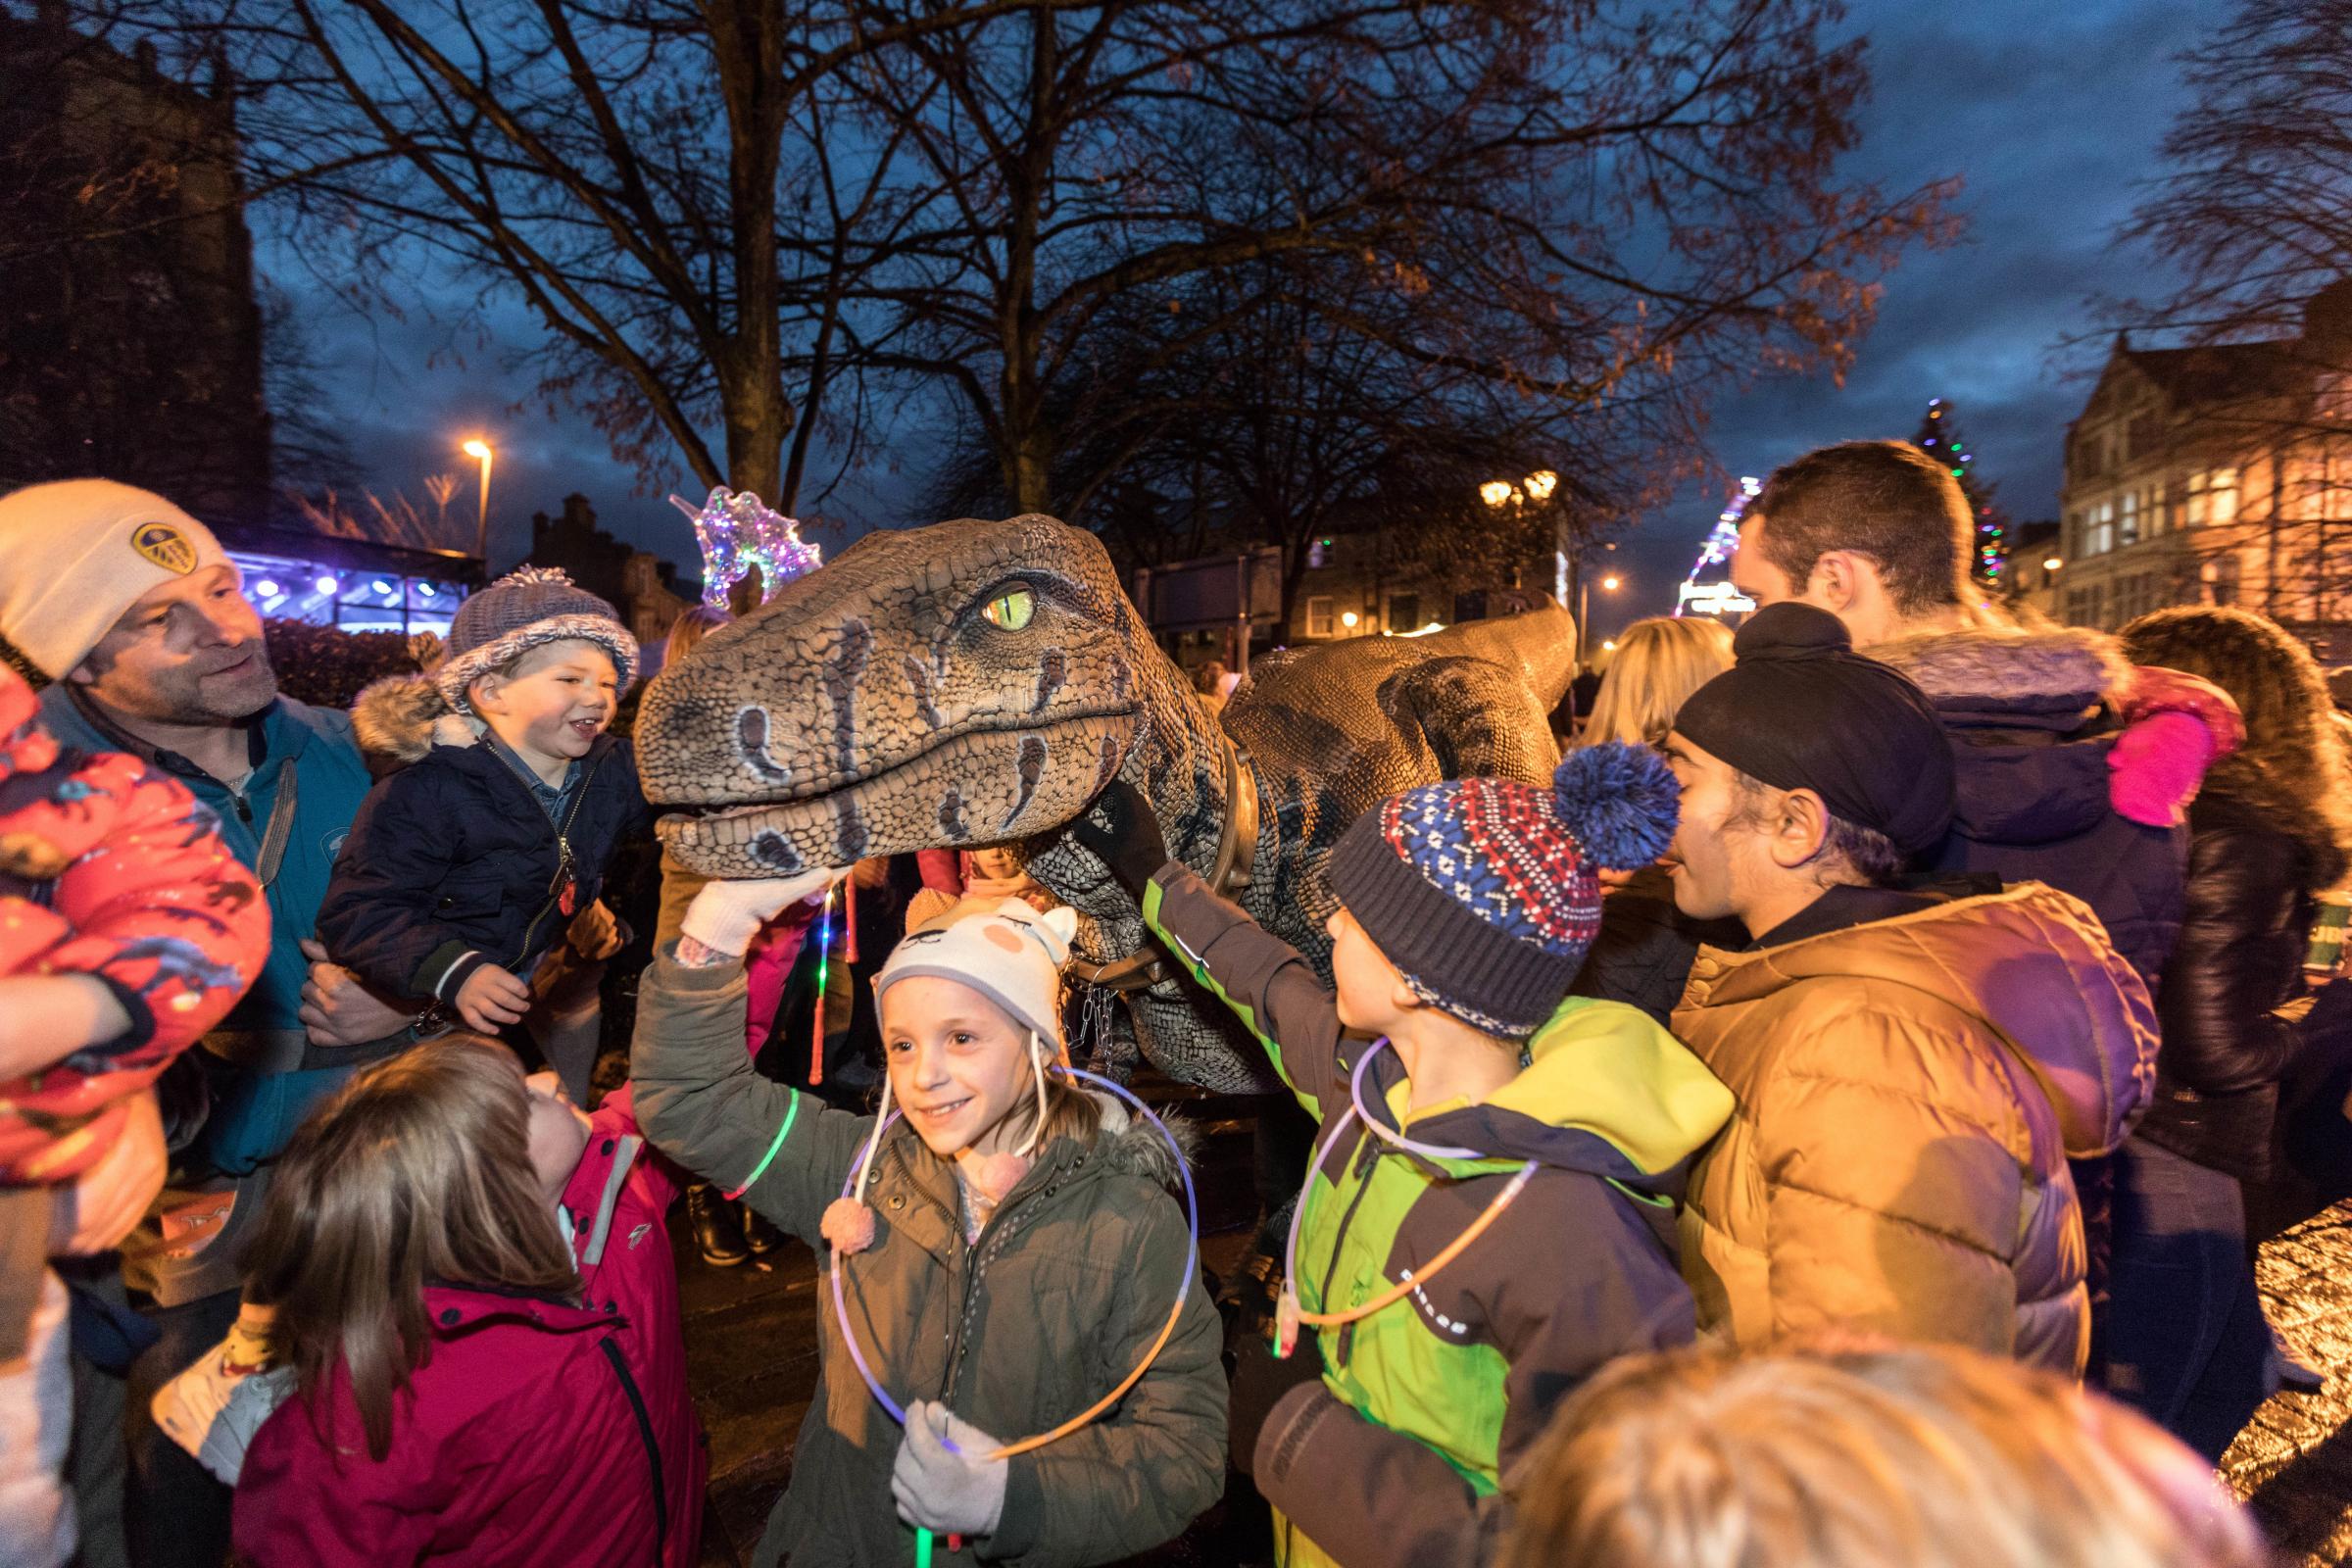 Dinosaur fun comes to Keighley this Halloween